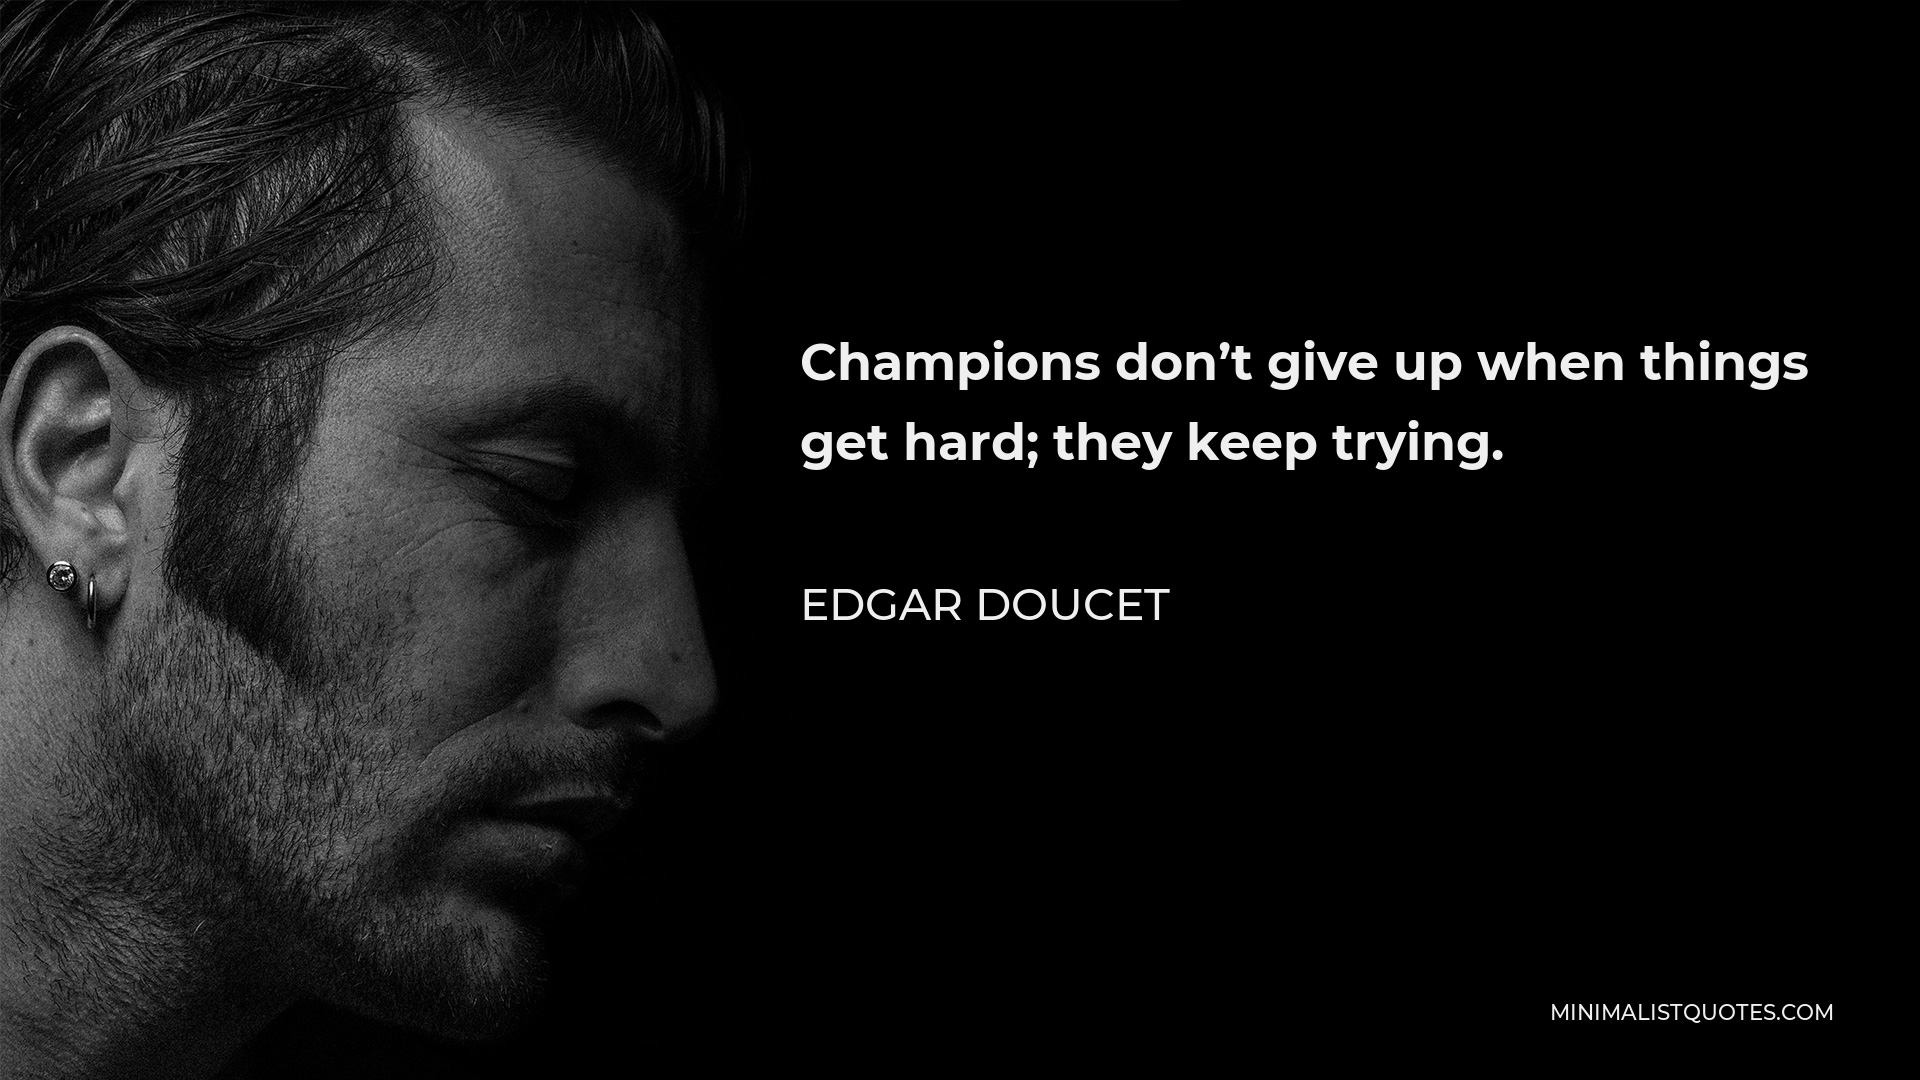 Edgar Doucet Quote - Champions don’t give up when things get hard; they keep trying.  